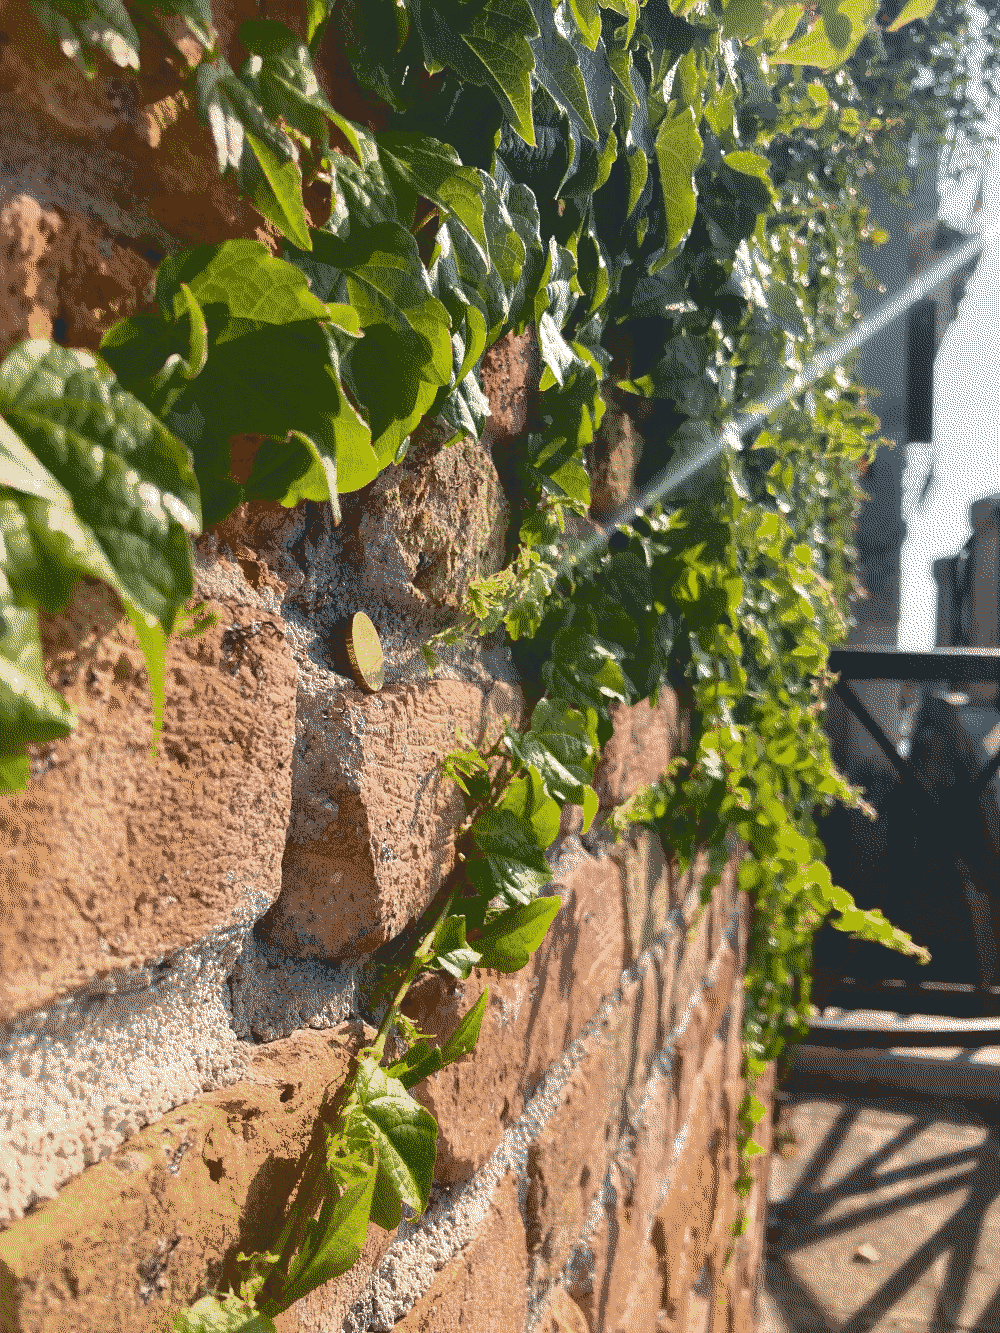 A coin shines in the sunlight, sitting against a brick wall with ivy surrounding it.